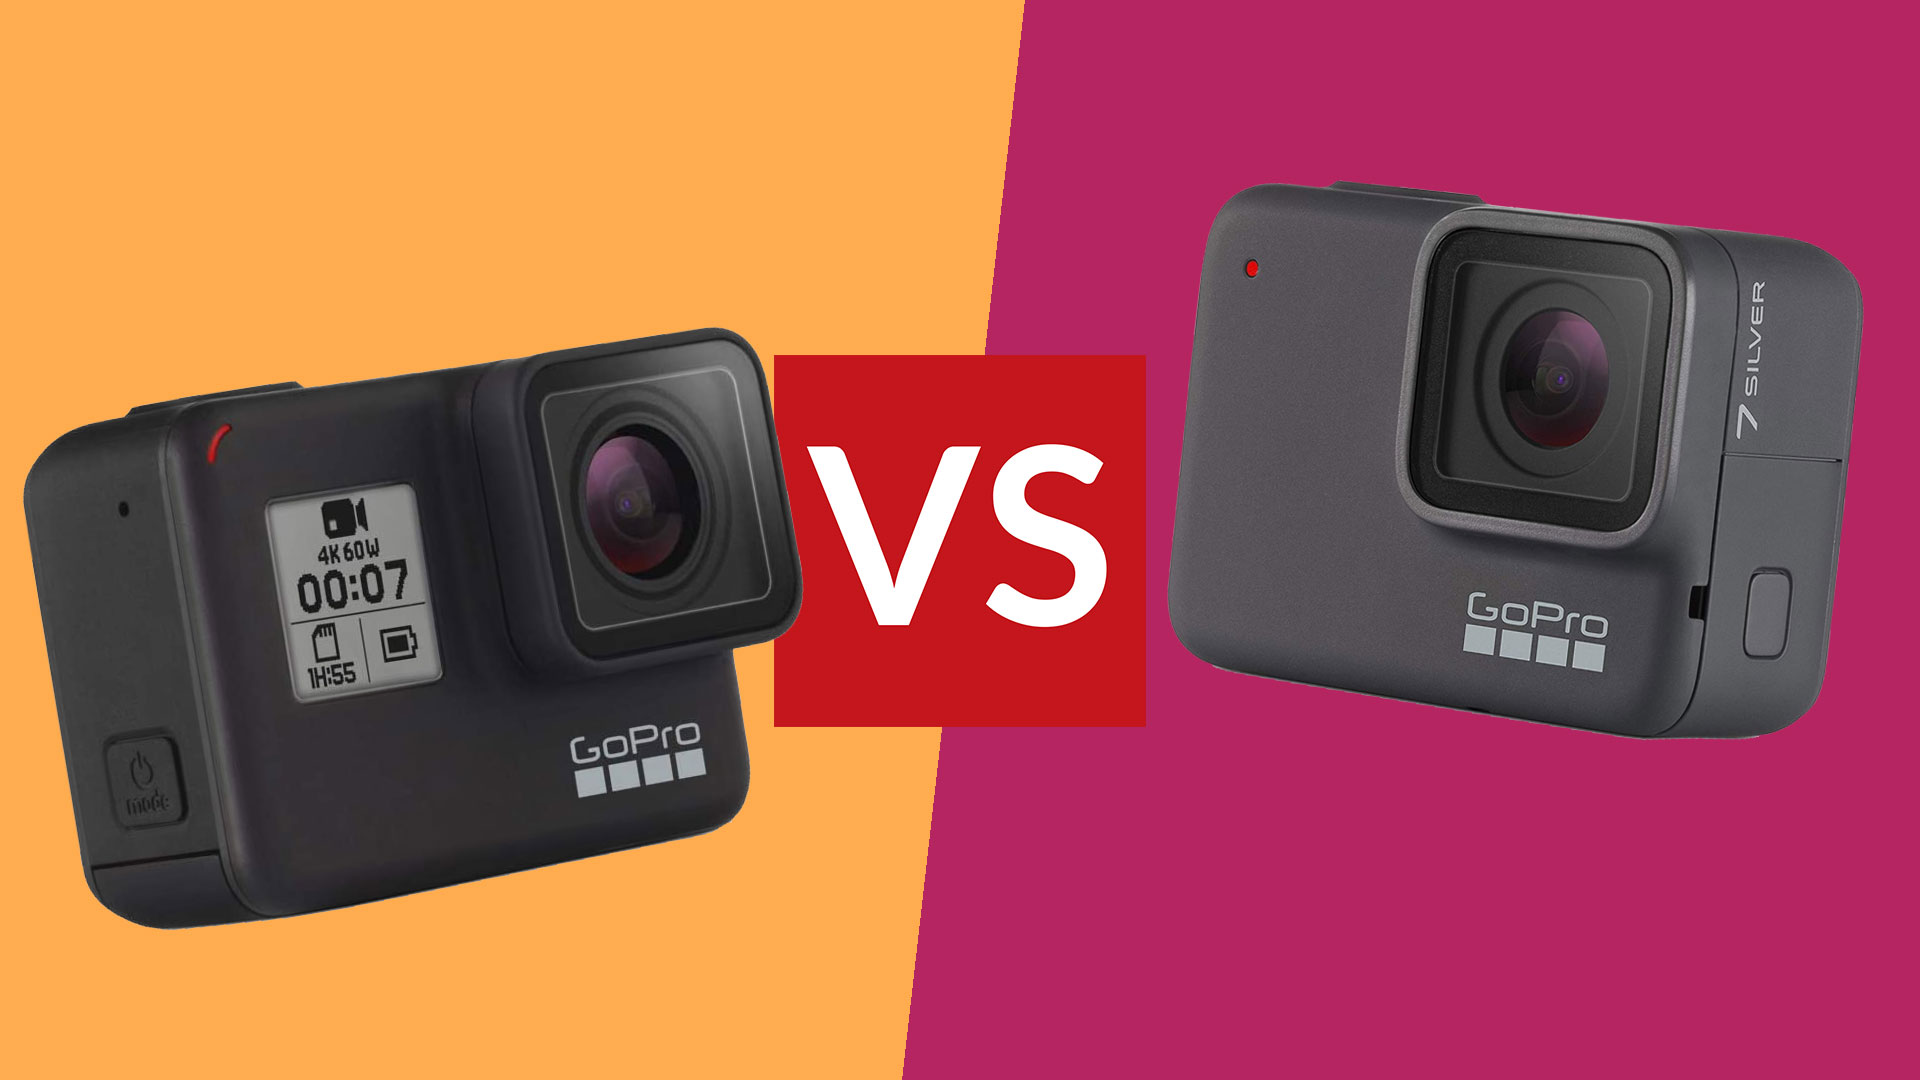 GoPro HERO 7 Black vs GoPro HERO 7 Silver: which budget action cam is